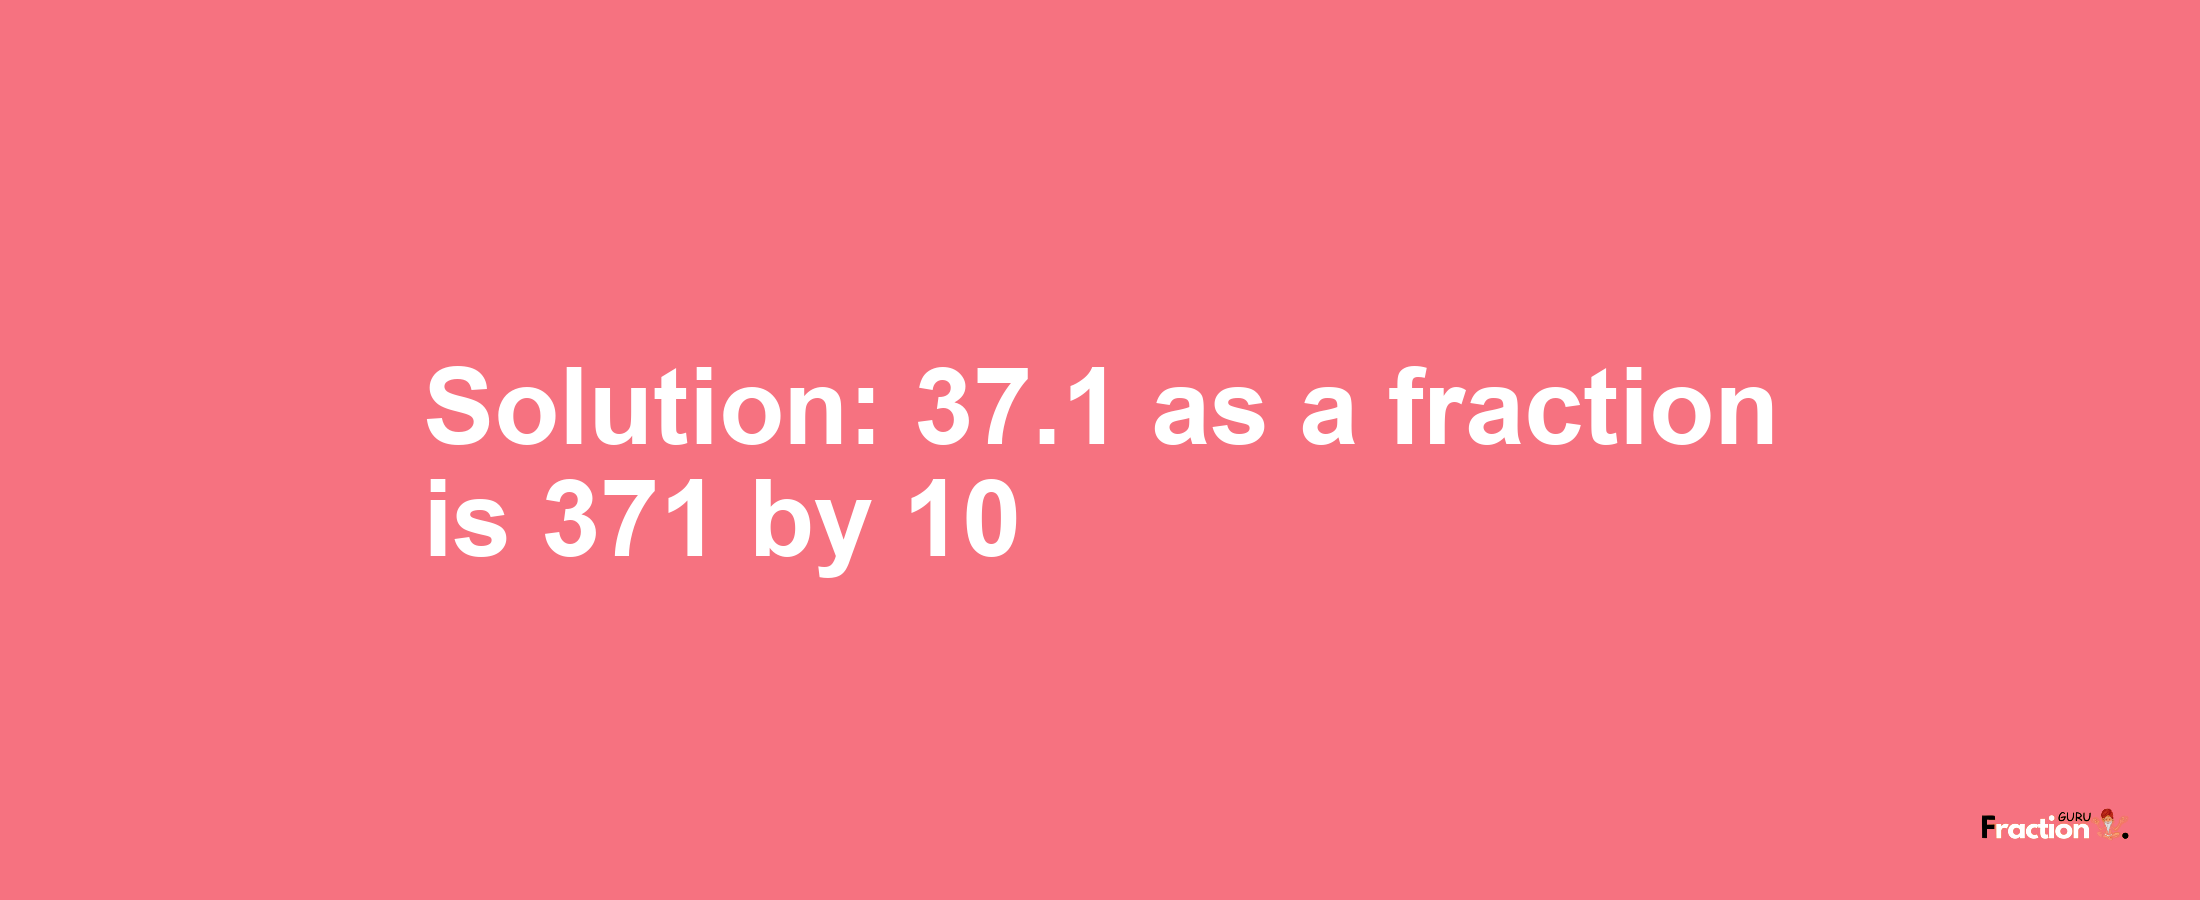 Solution:37.1 as a fraction is 371/10